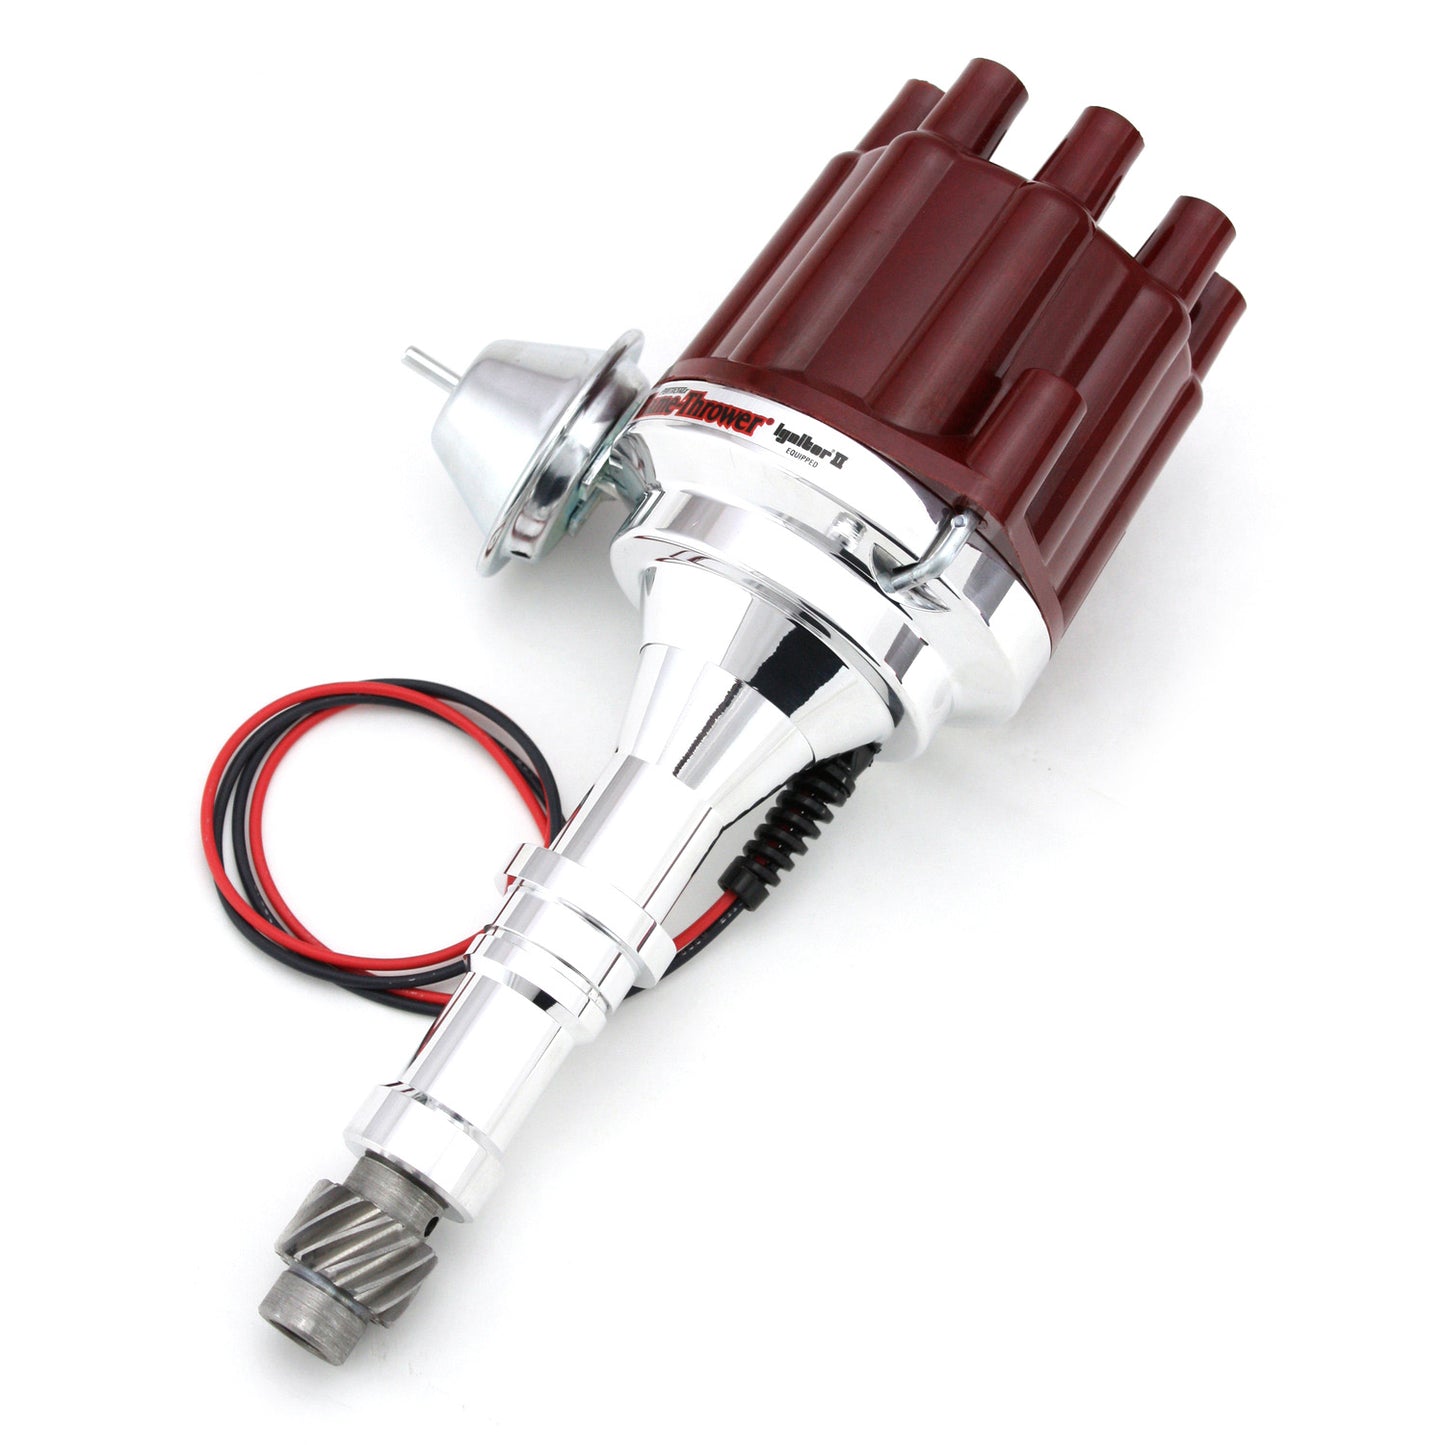 PerTronix D151701 Flame-Thrower Electronic Distributor Billet Buick V8 215-350 Plug and Play with Ignitor II Technology Vacuum Advance Red Cap